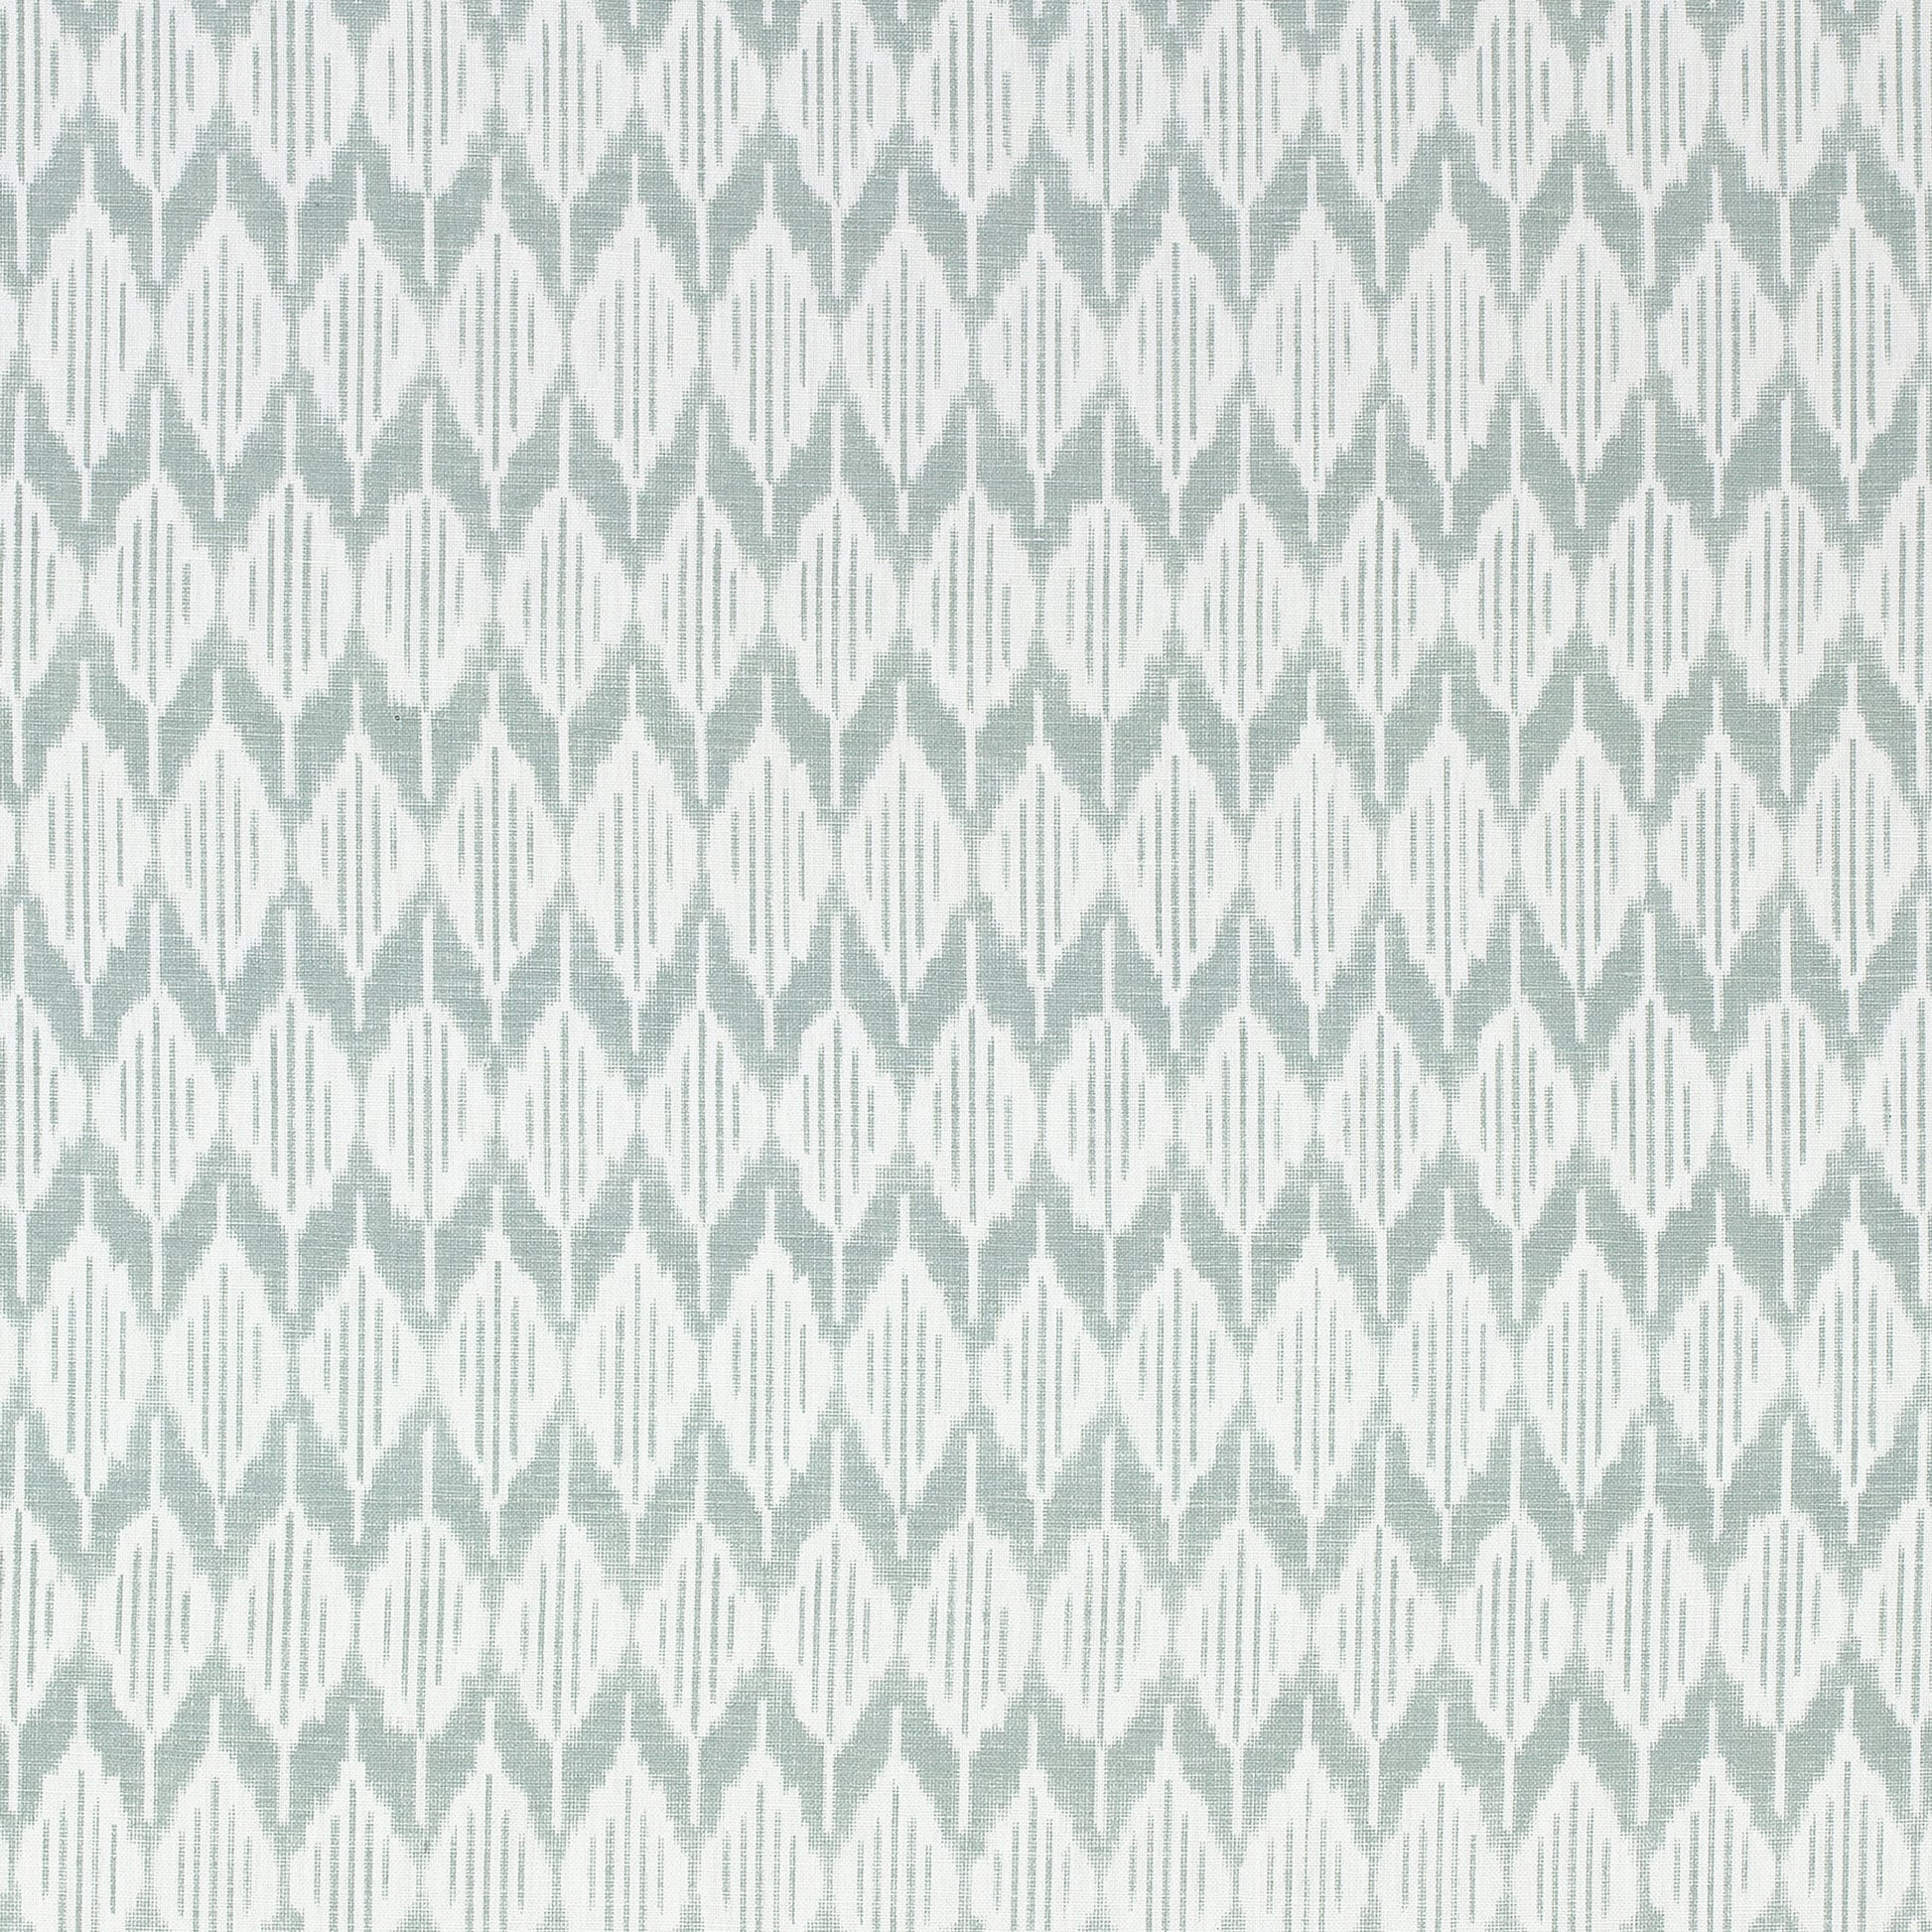 Purchase  Ann French Fabric Product# AF73022  pattern name  Balin Ikat